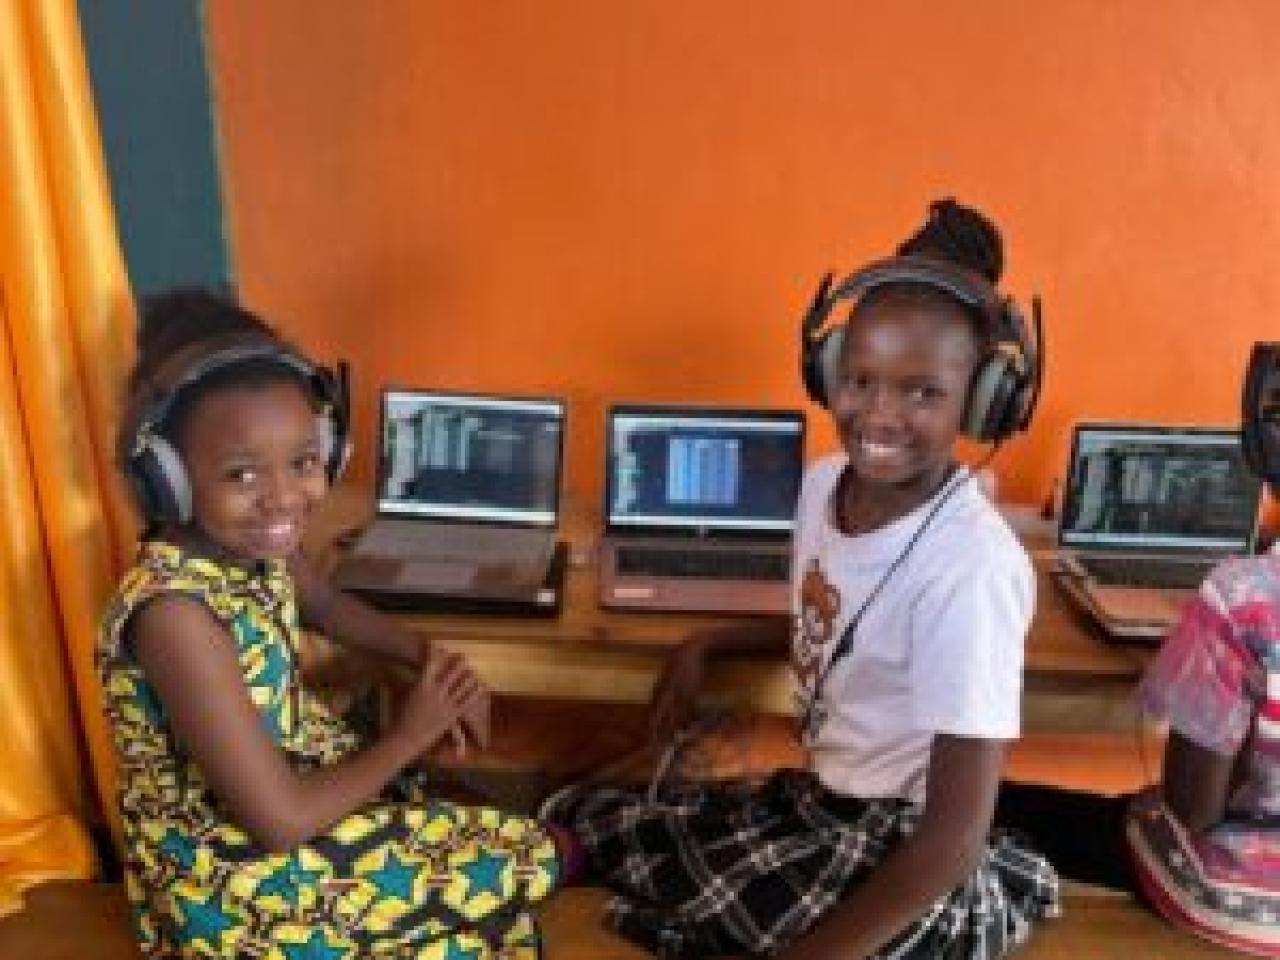 Two smiling children with headphones at a desk with open laptops.